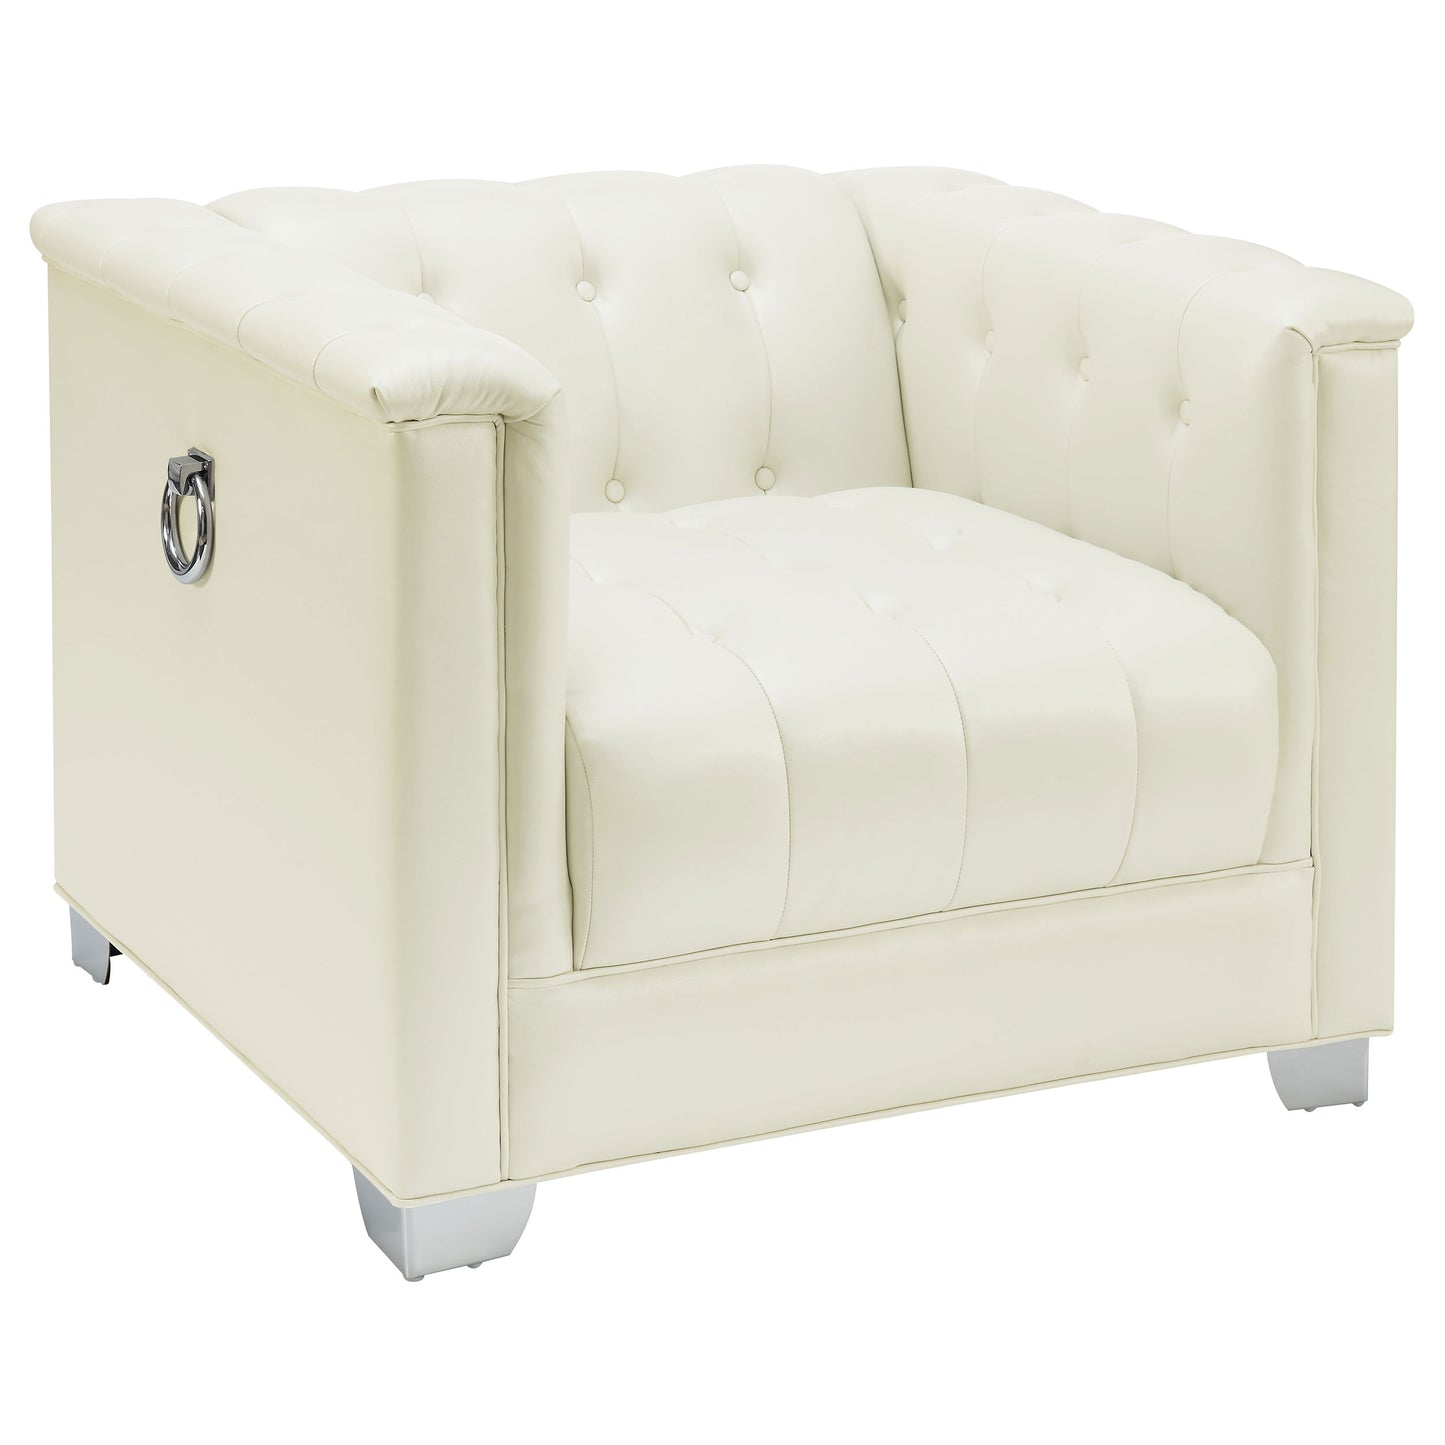 Chaviano 4-piece Upholstered Tufted Sofa Set Pearl White